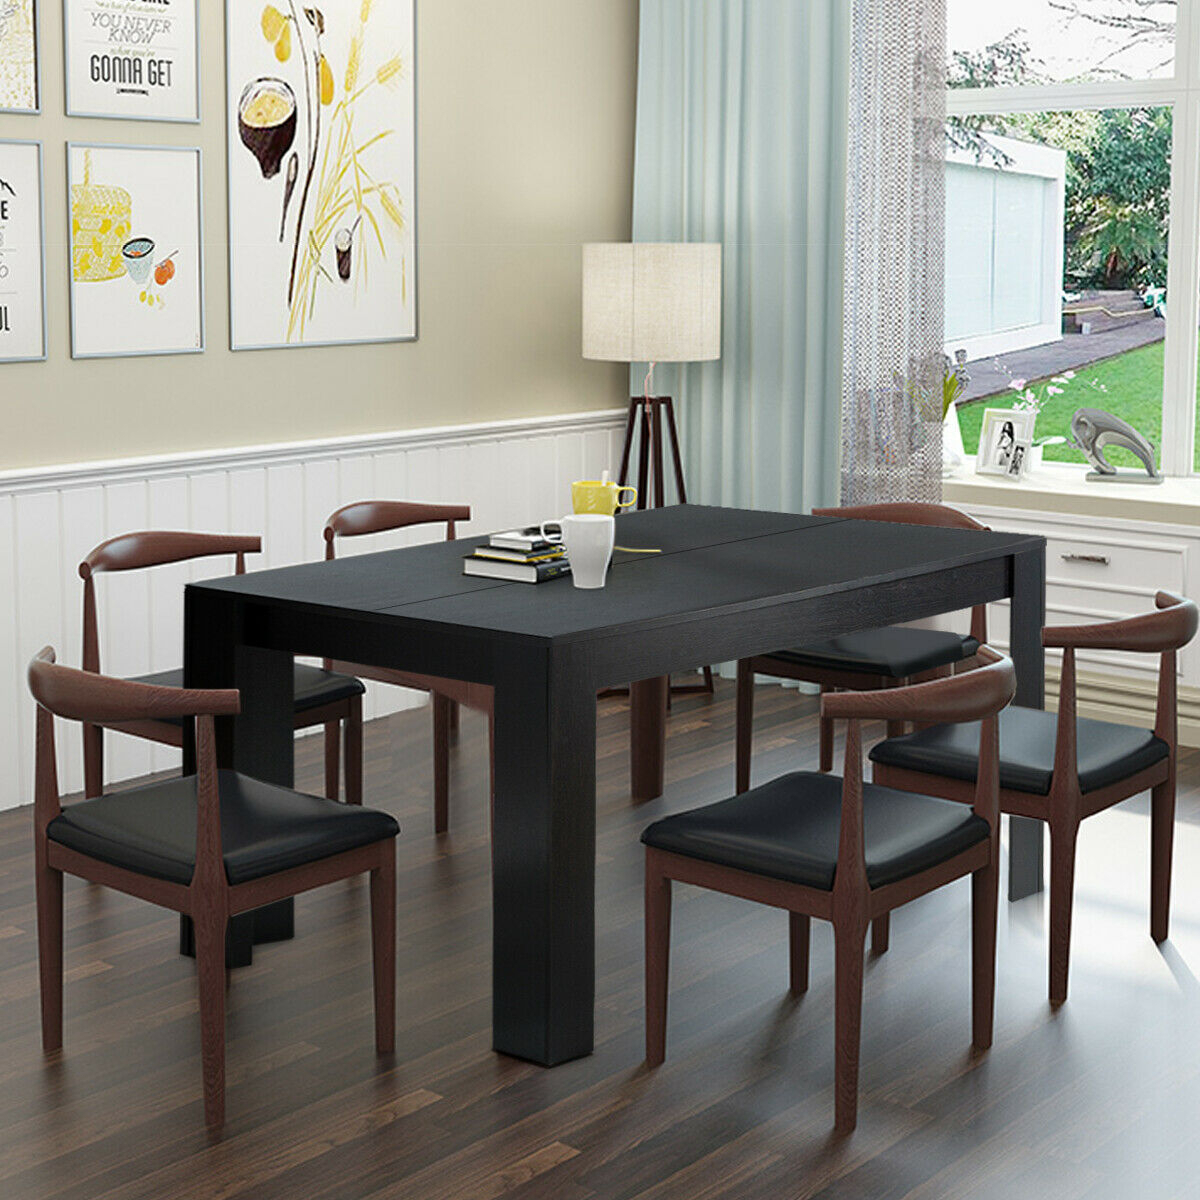 63'' Dining Table Rectangular Modern Kitchen Table For 6 People Home Furniture